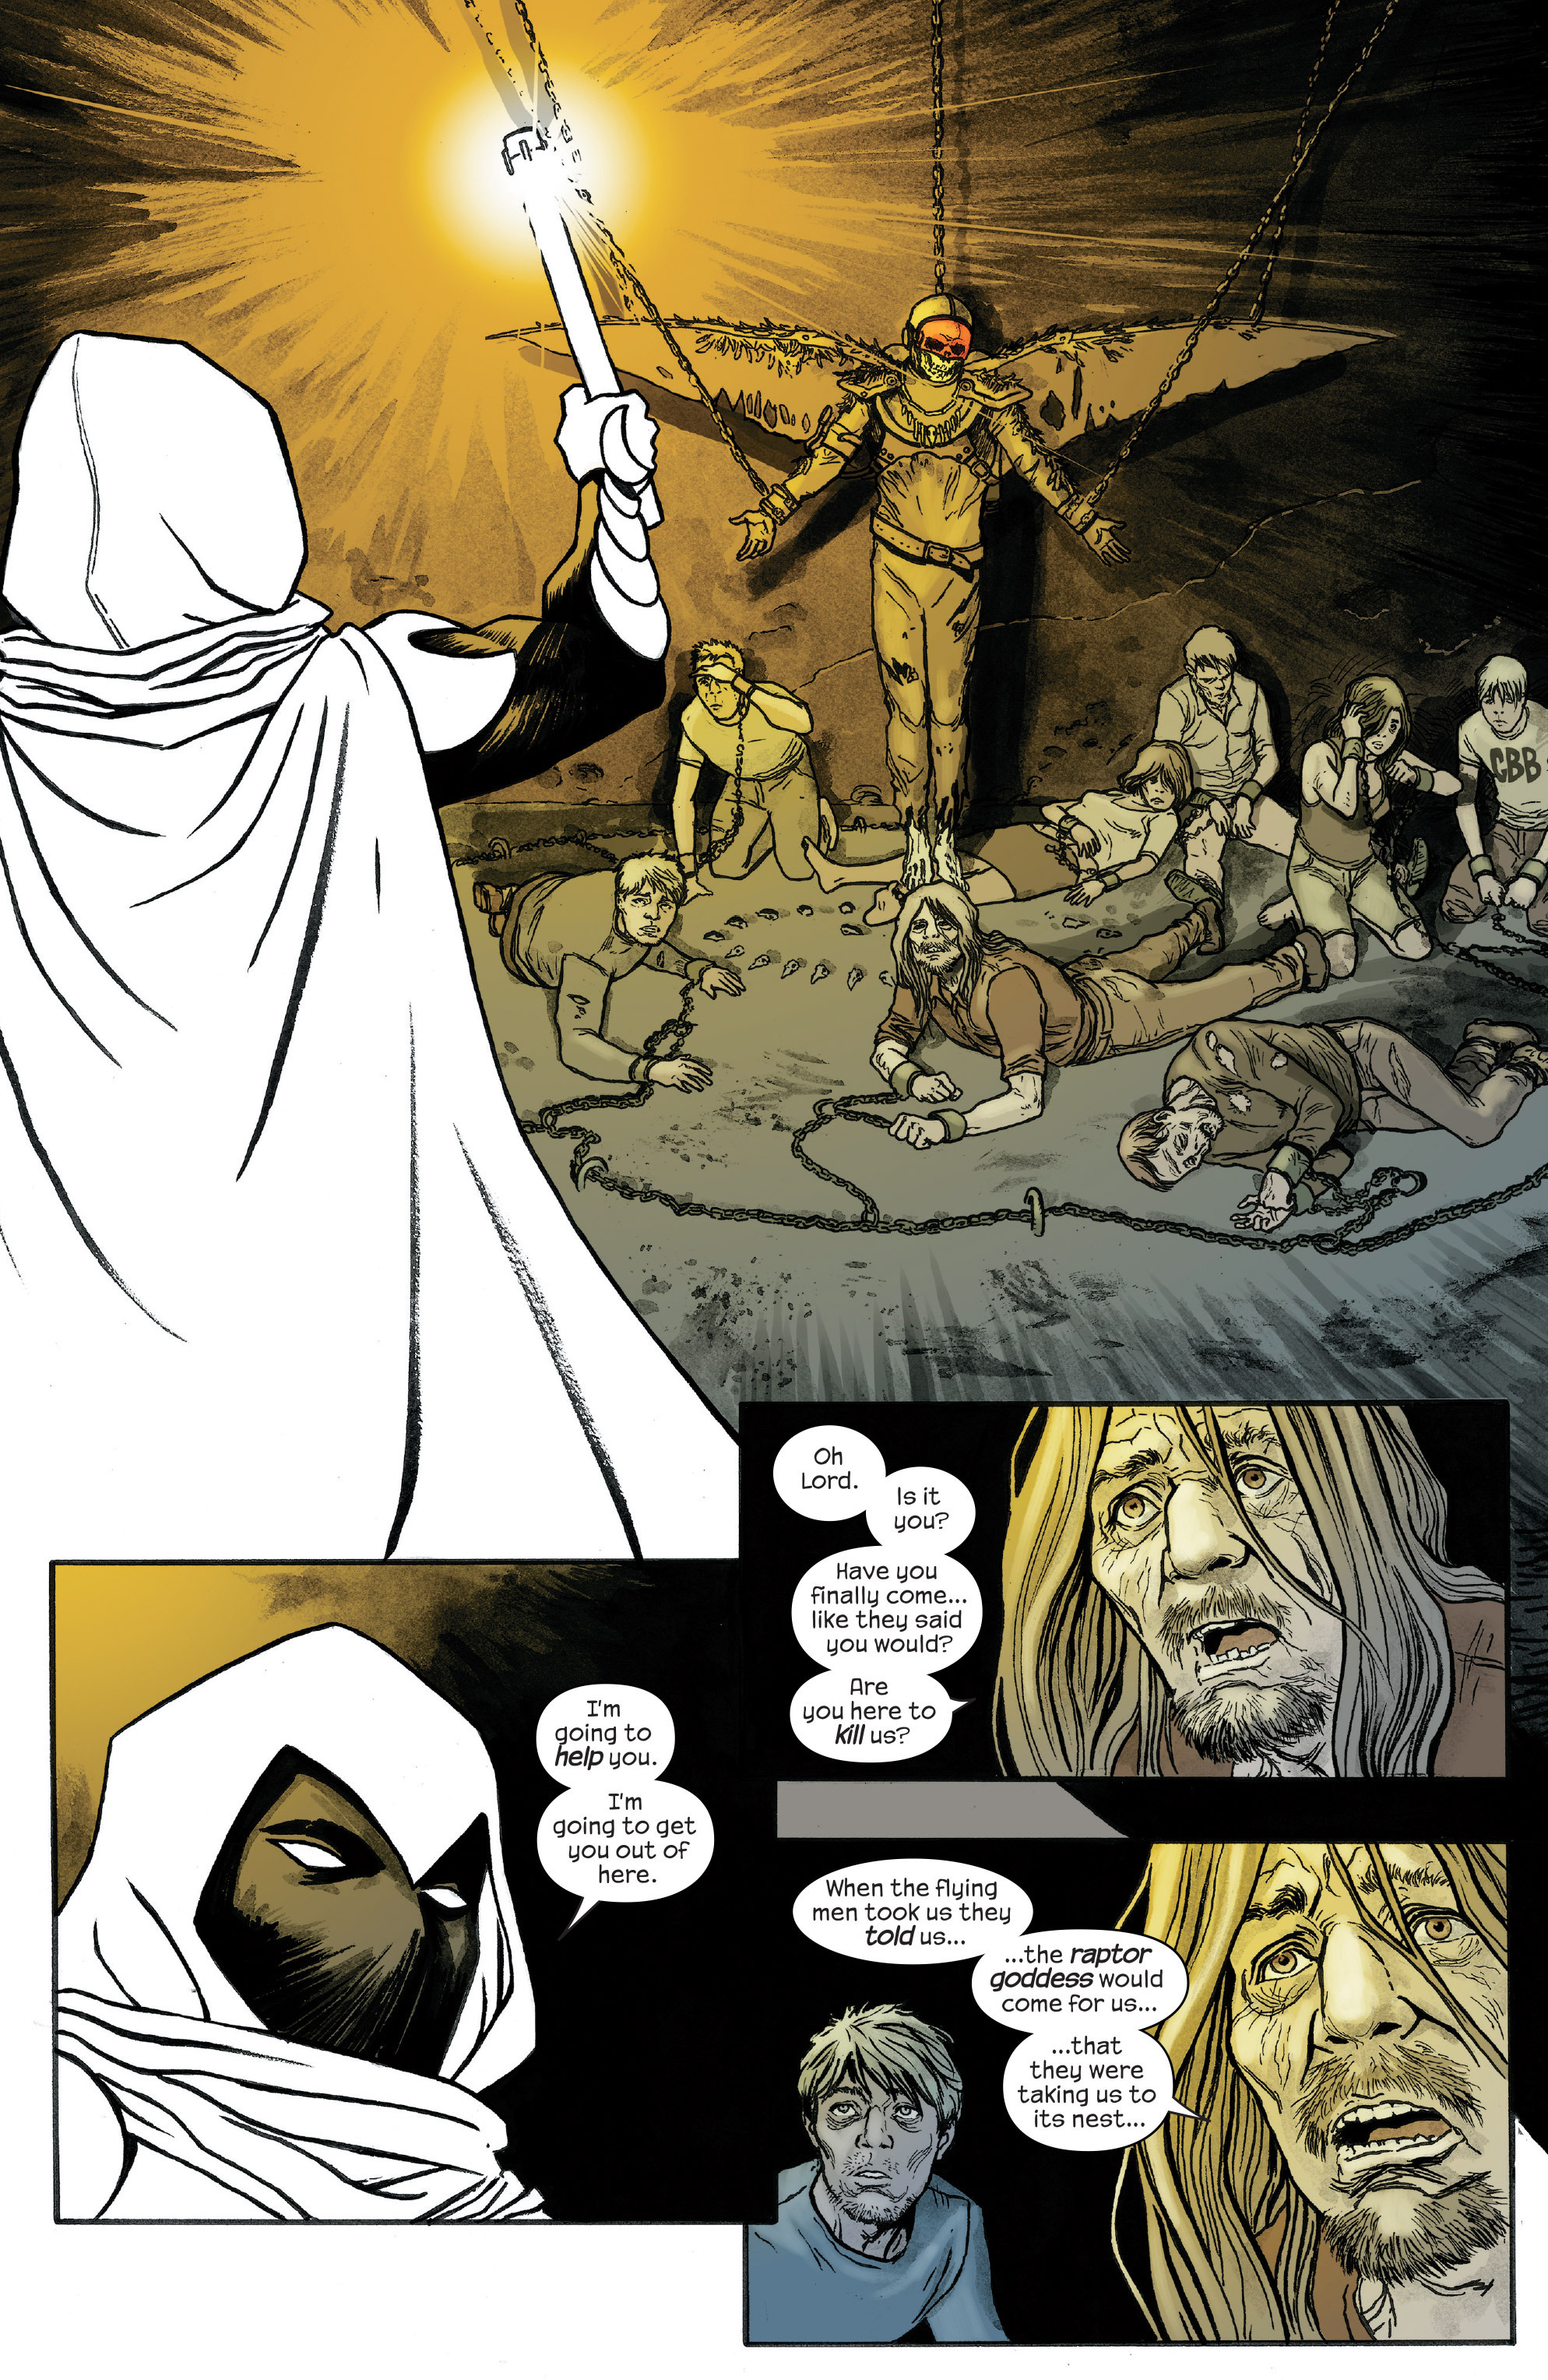 Moon Knight 2014 Issue 16 Read Moon Knight 2014 Issue 16 Comic Online In High Quality Read